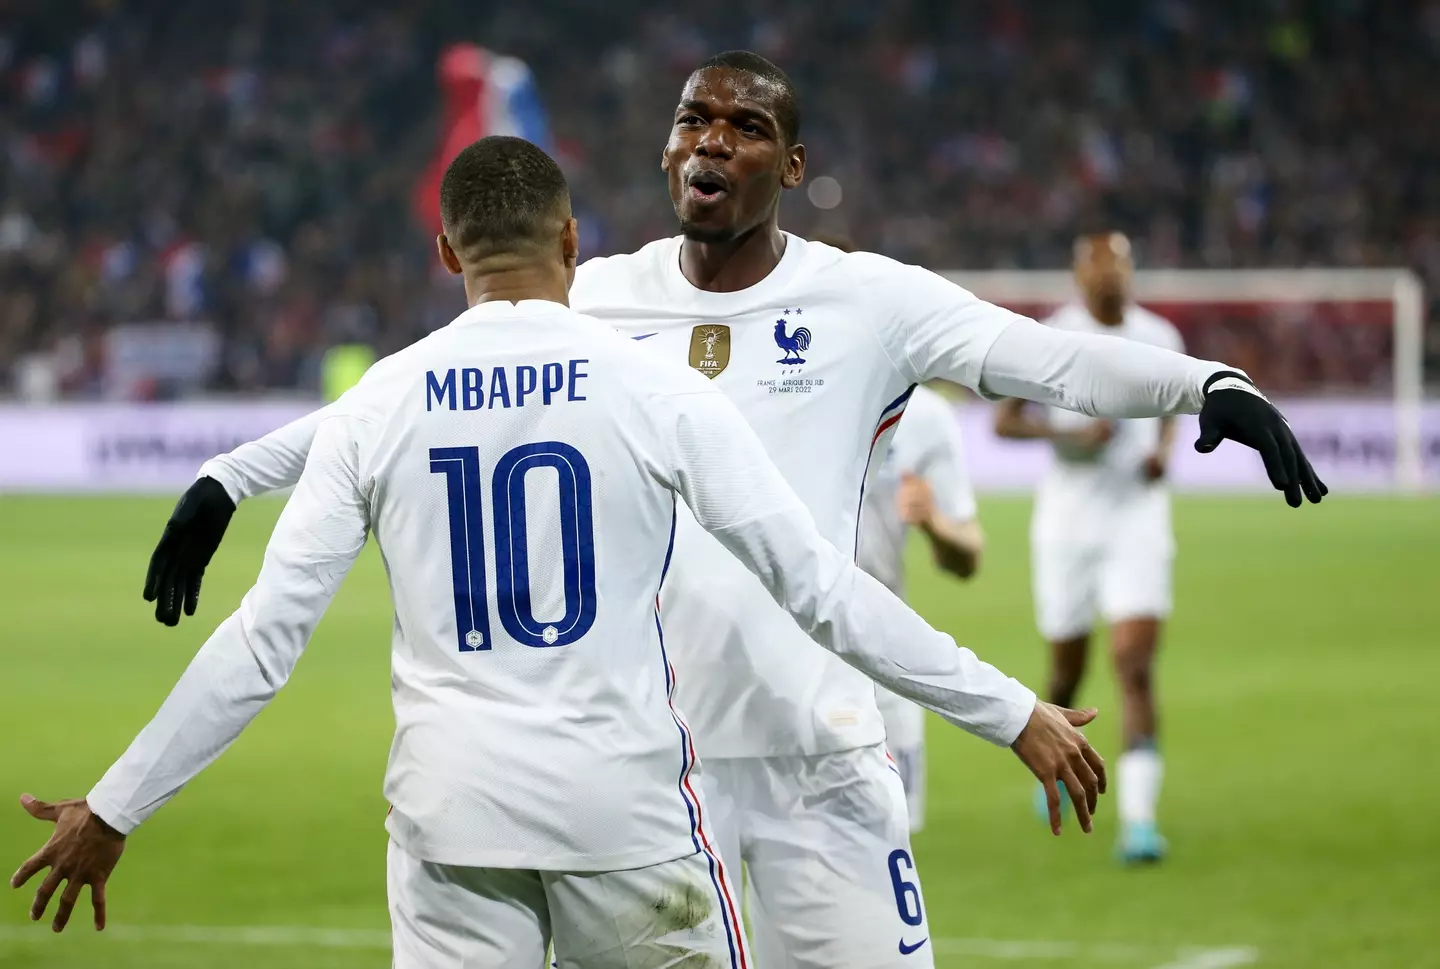 Kylian Mbappe and Paul Pogba celebrate a goal for France. Image: Getty 